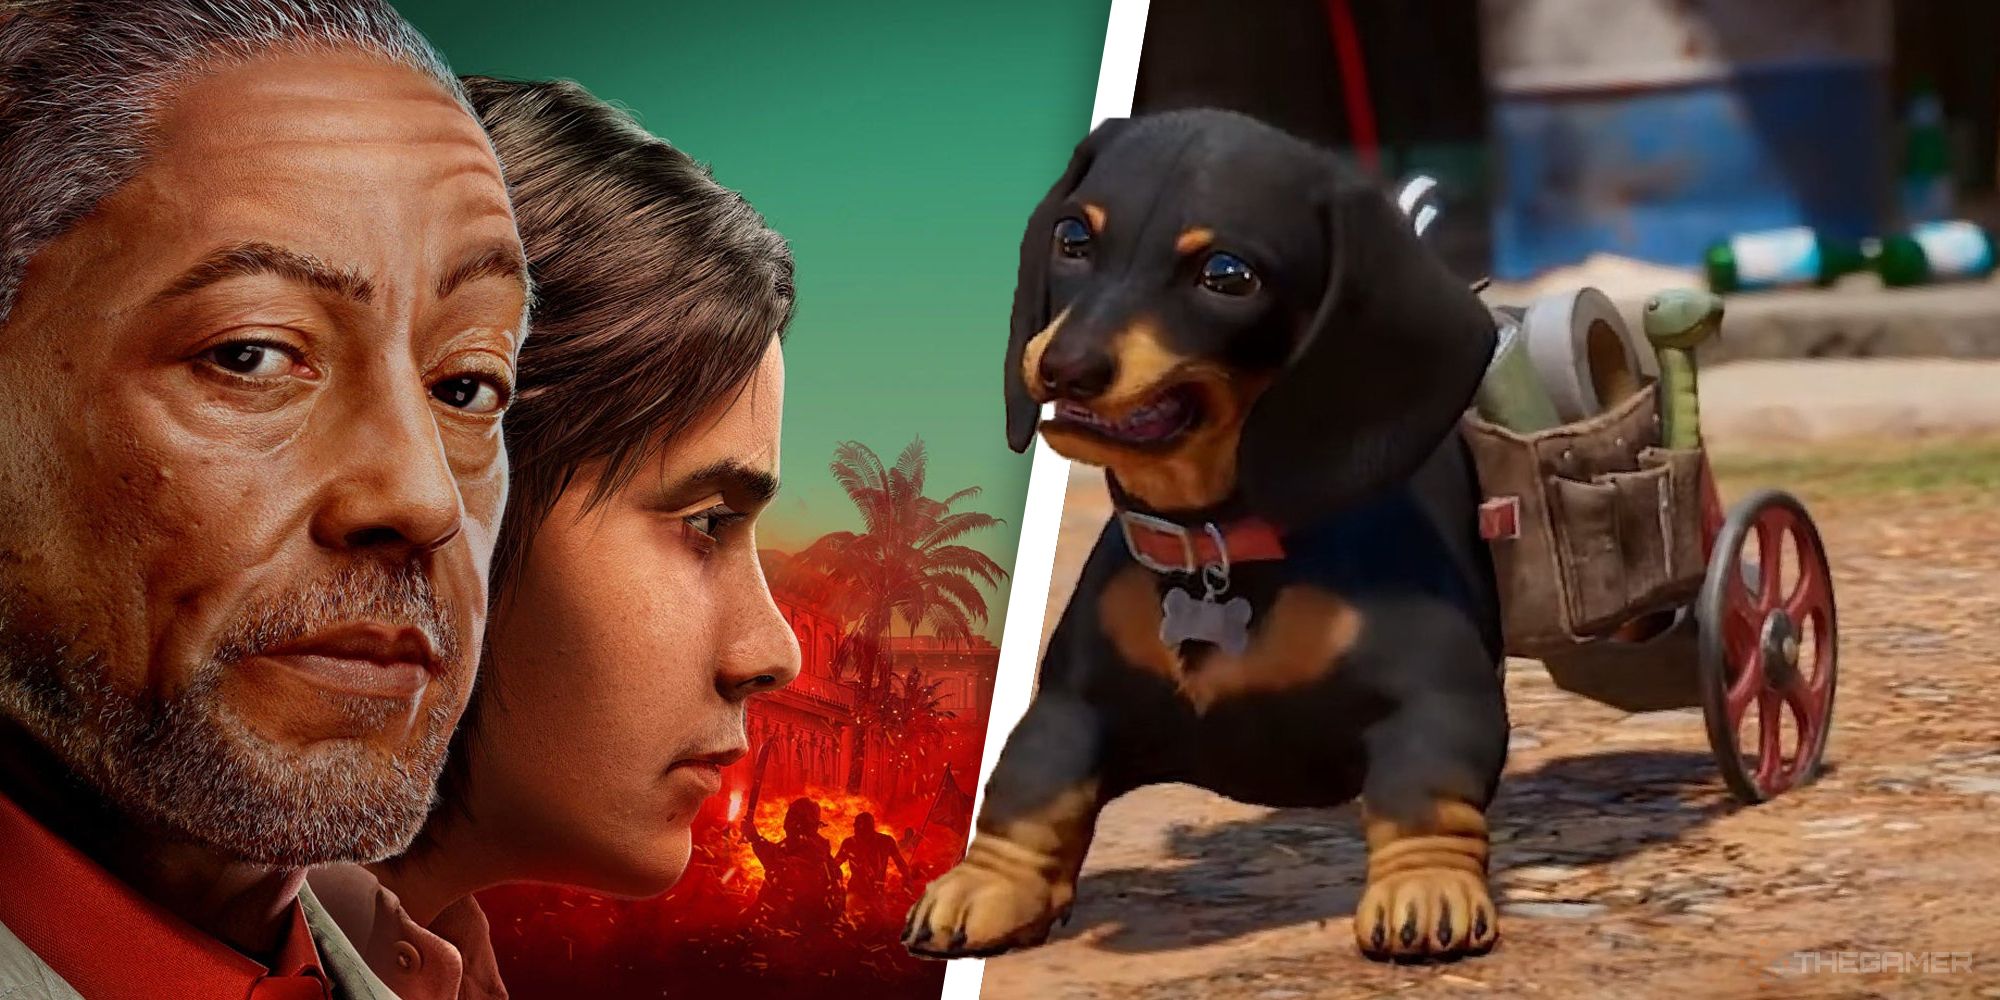 The Best Animal Companions in Far Cry 6